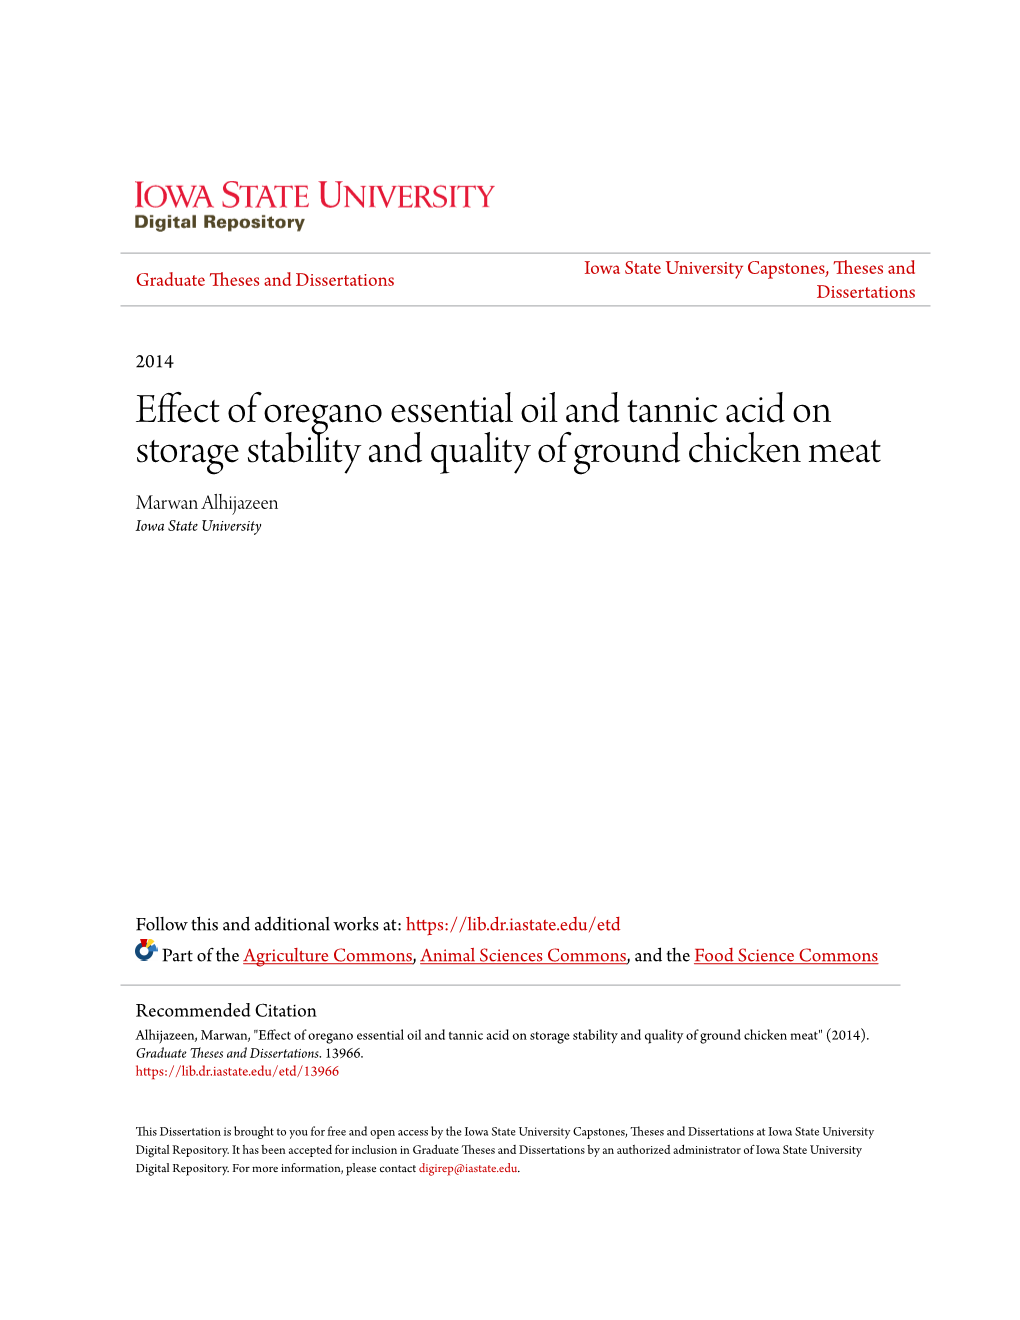 Effect of Oregano Essential Oil and Tannic Acid on Storage Stability and Quality of Ground Chicken Meat Marwan Alhijazeen Iowa State University